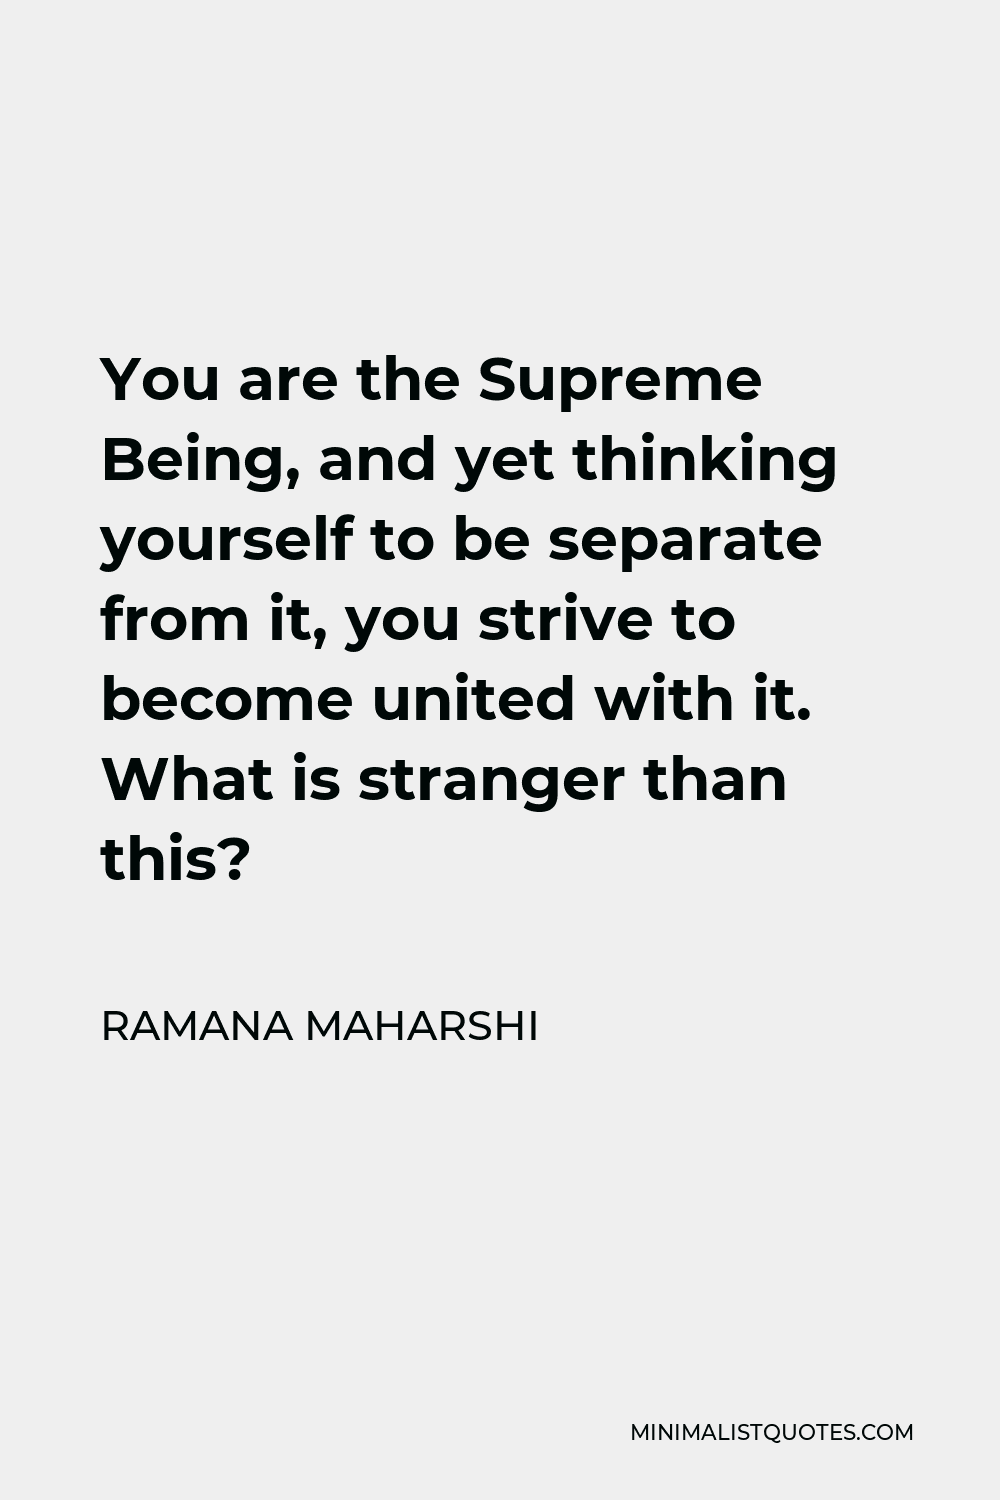 Ramana Maharshi Quote - You are the Supreme Being, and yet thinking yourself to be separate from it, you strive to become united with it. What is stranger than this?